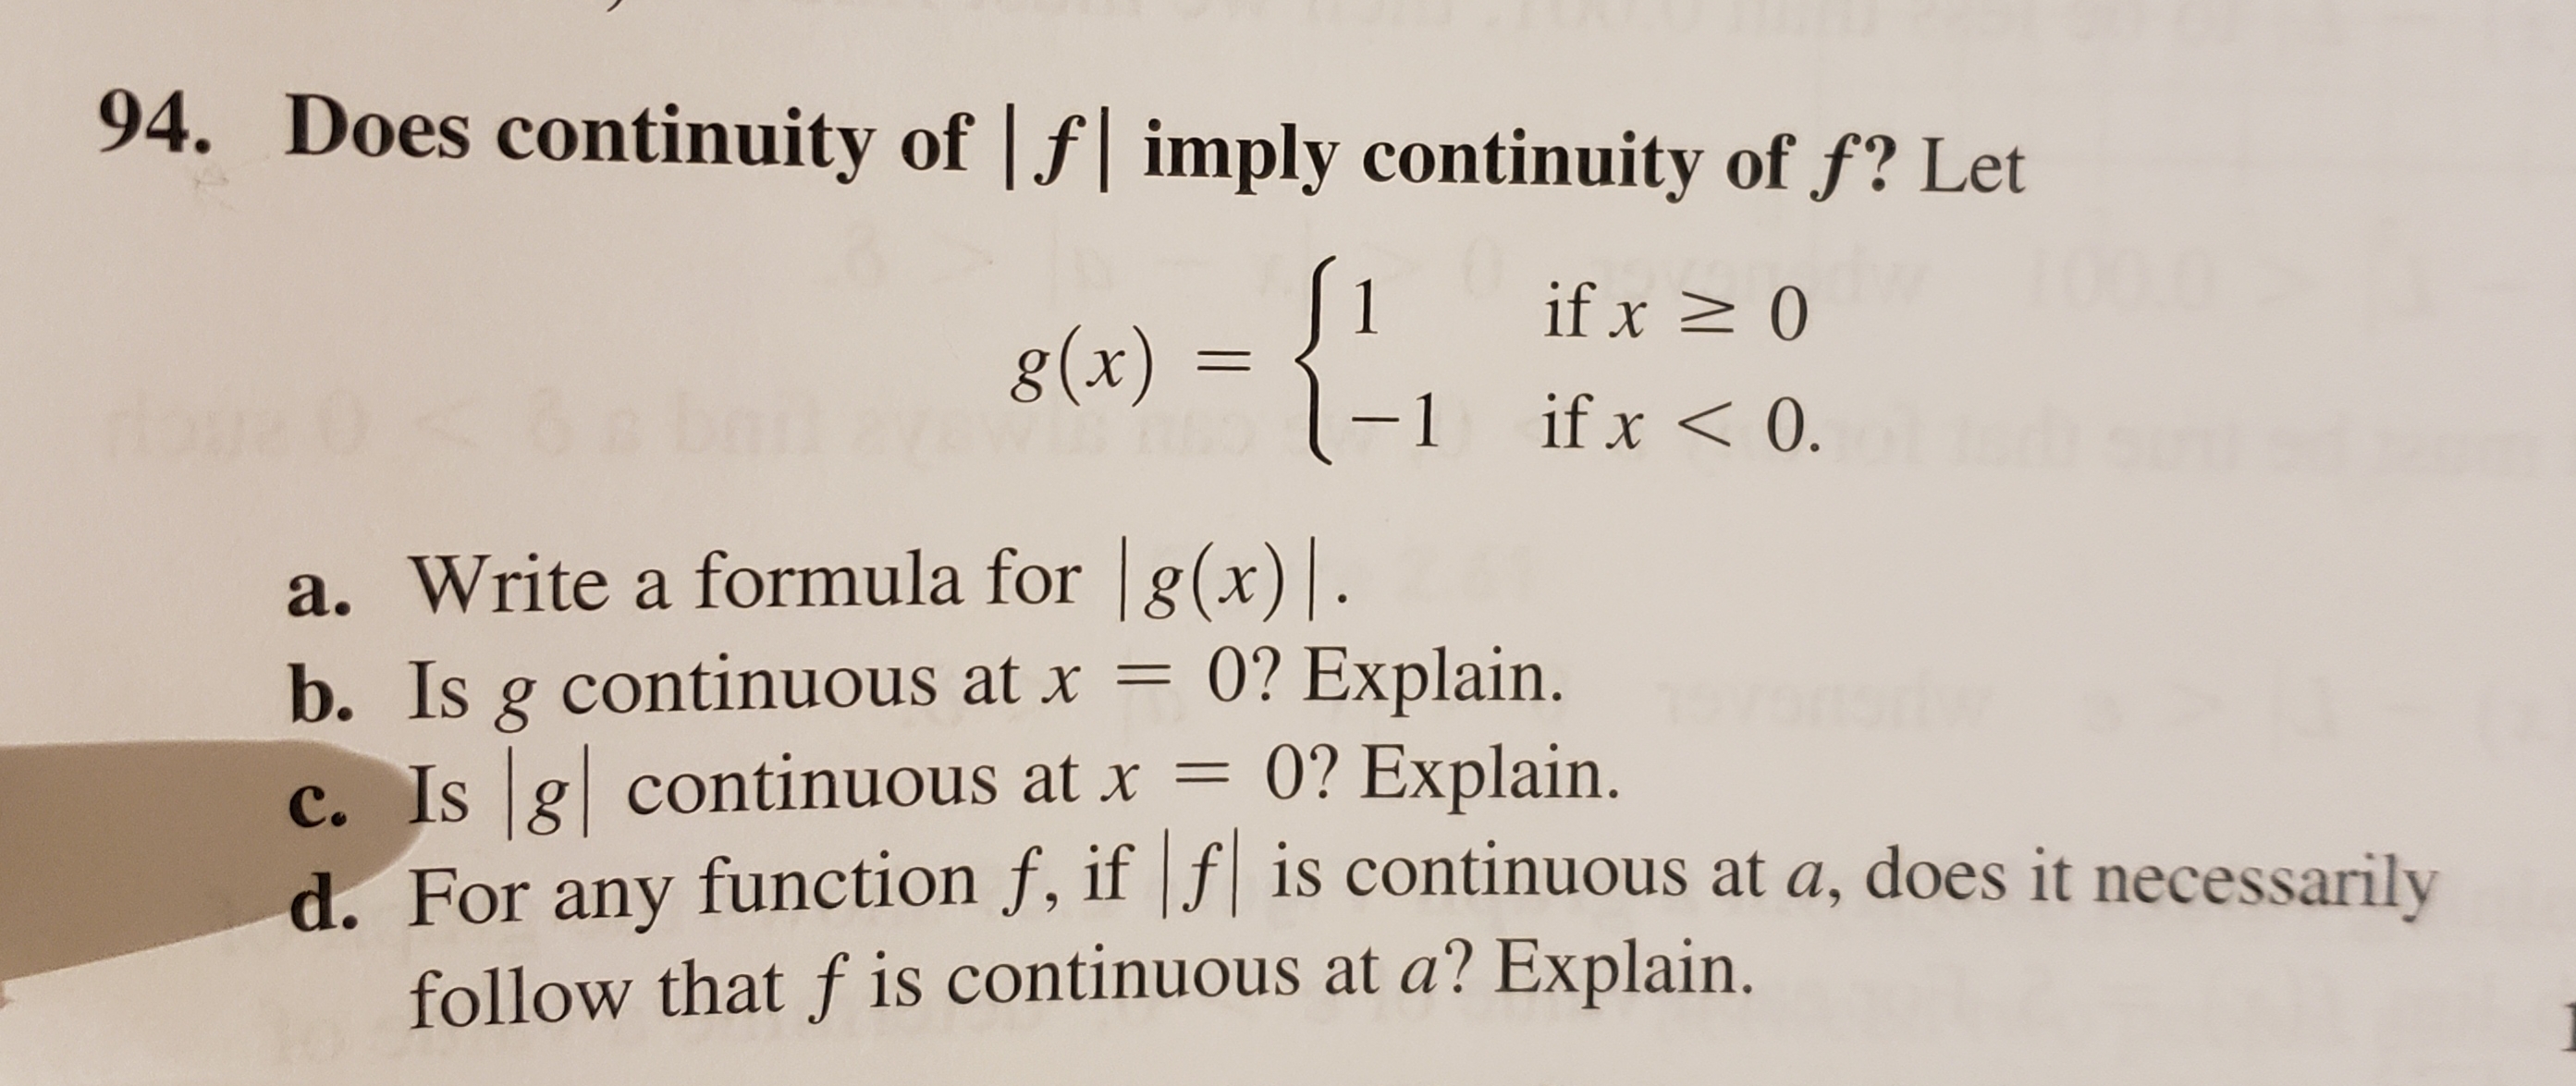 Does continuity of f imply continuity of f? Let
94.
1
g(x)=1
if x 0
if x< 0.
-1
a. Write a formula for g(x).
b. Is g continuous at x = 0? Explain.
0? Explain.
c. Is g continuous at x =
d. For any function f, iffis continuous at a, does it necessarily
follow that f is continuous at a? Explain.
